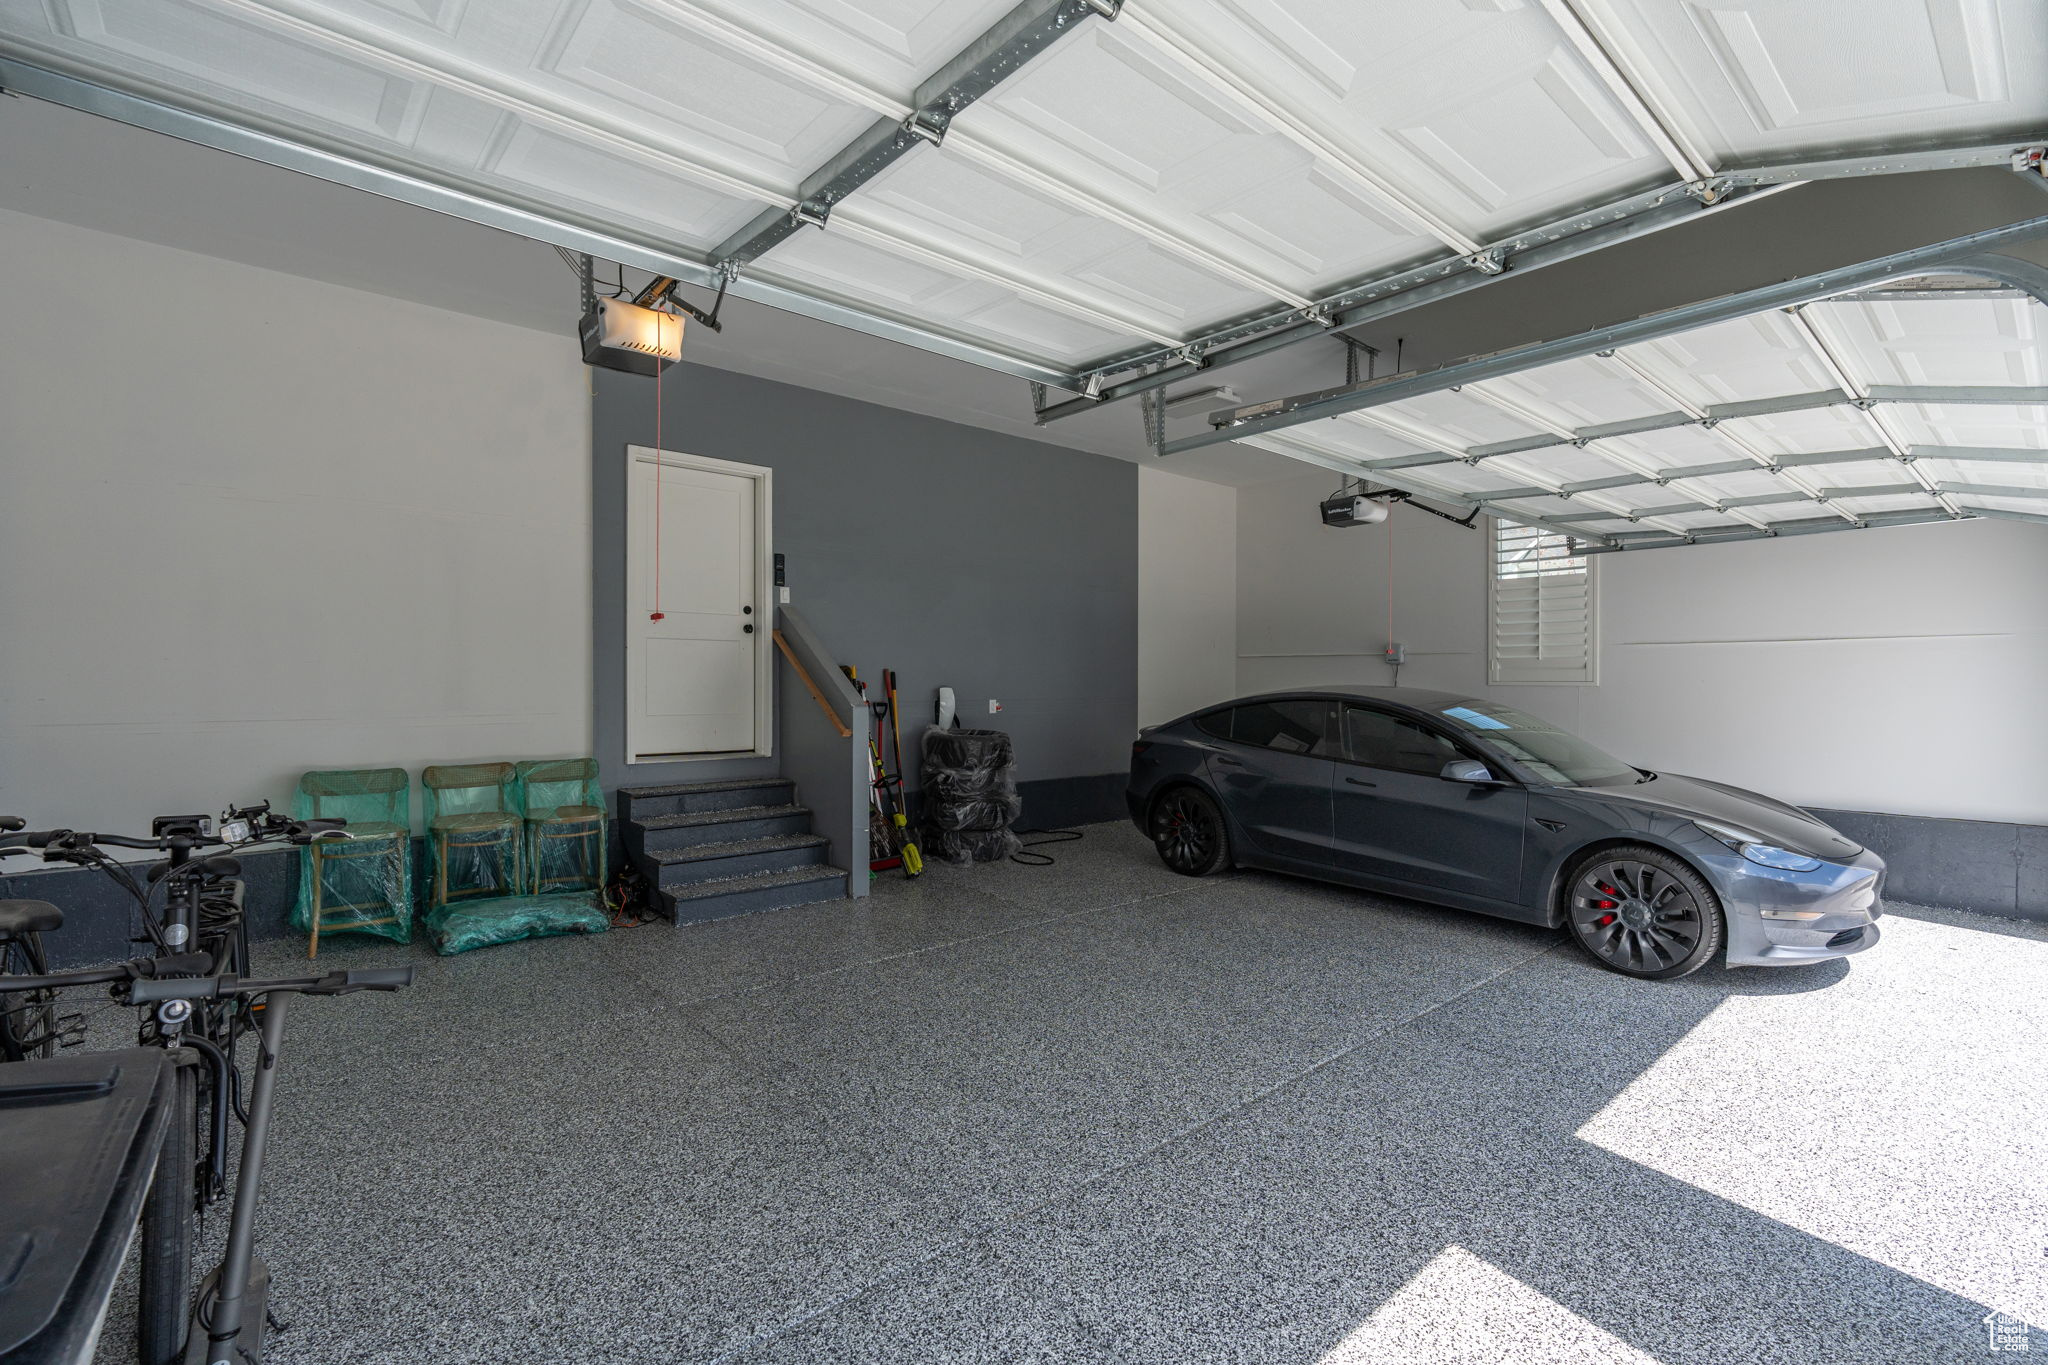 Three-car garage with finished walls, a side entry door, plantation shutters, epoxy flooring, and wiring to charge electric cars.